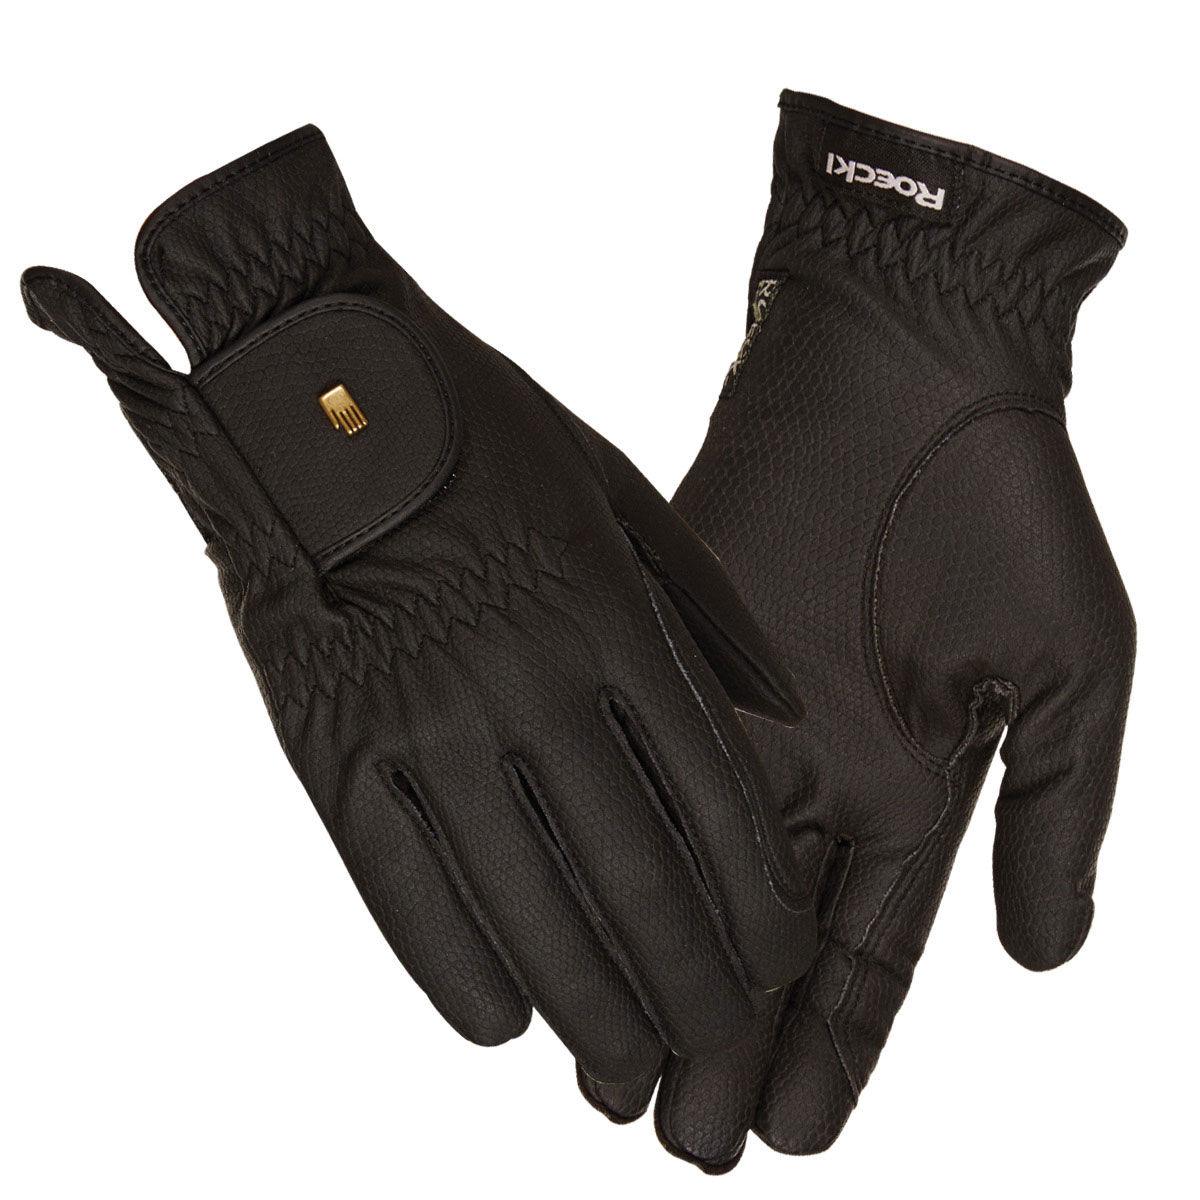 Roeckl Madrid Riding Gloves Touch Screen Compatible 